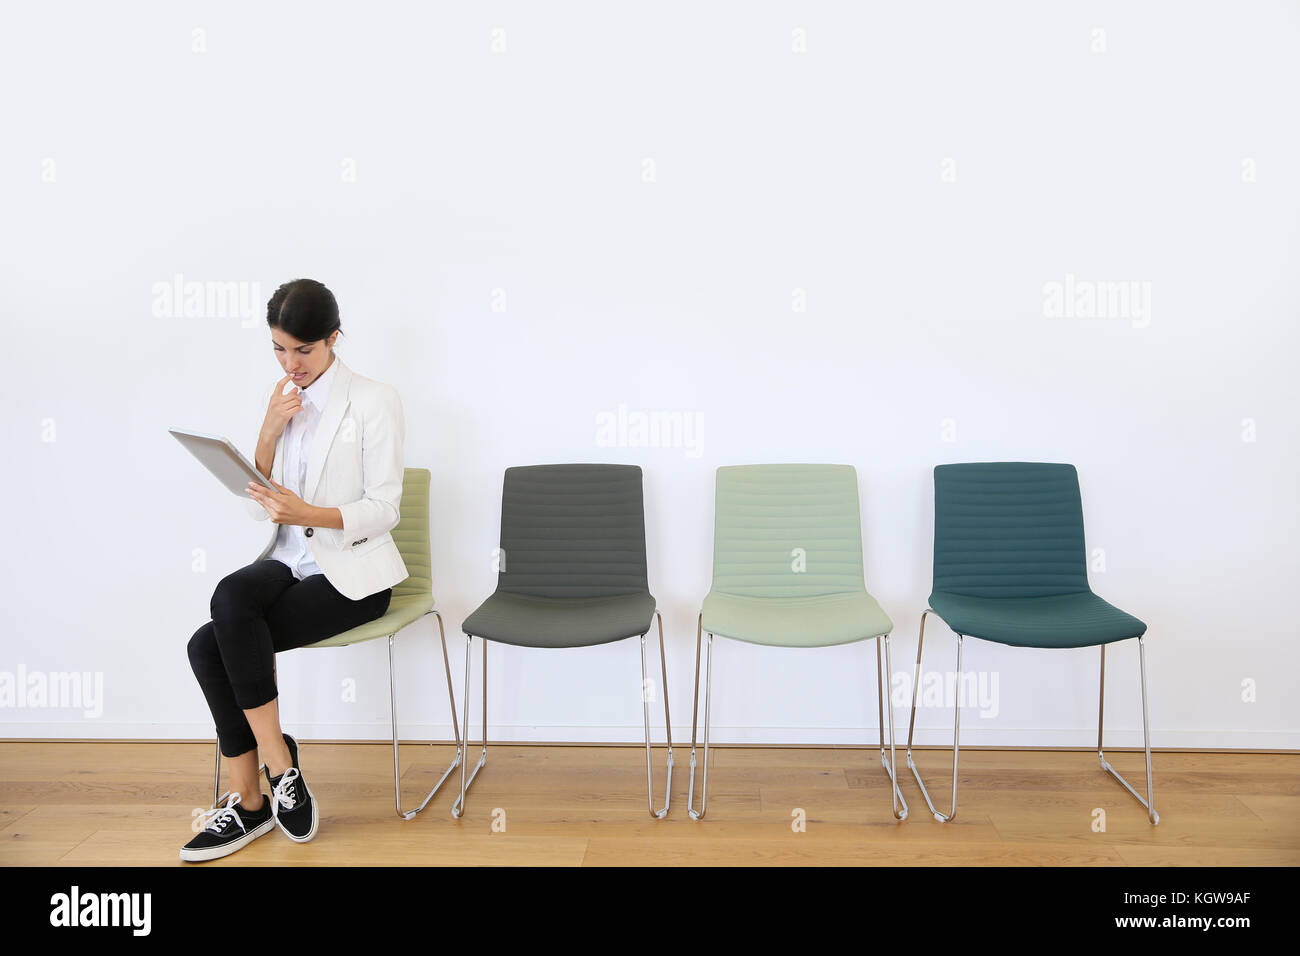 Woman in waiting room using digital tablet, concept Stock Photo